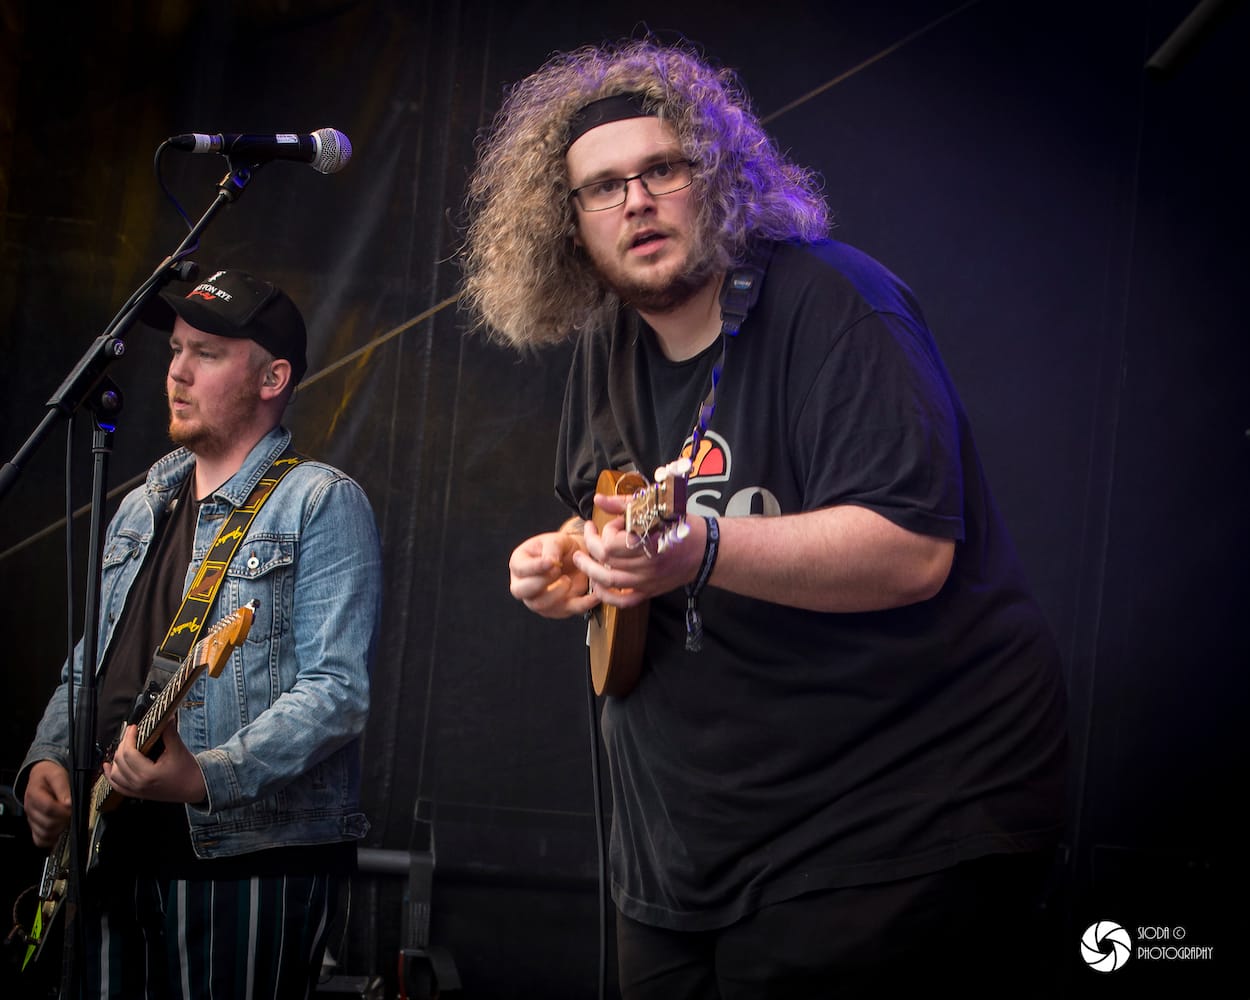 The Elephant Sessions at The Gathering 2019 7167 - Euan Smillie of The Elephant Session - Interview